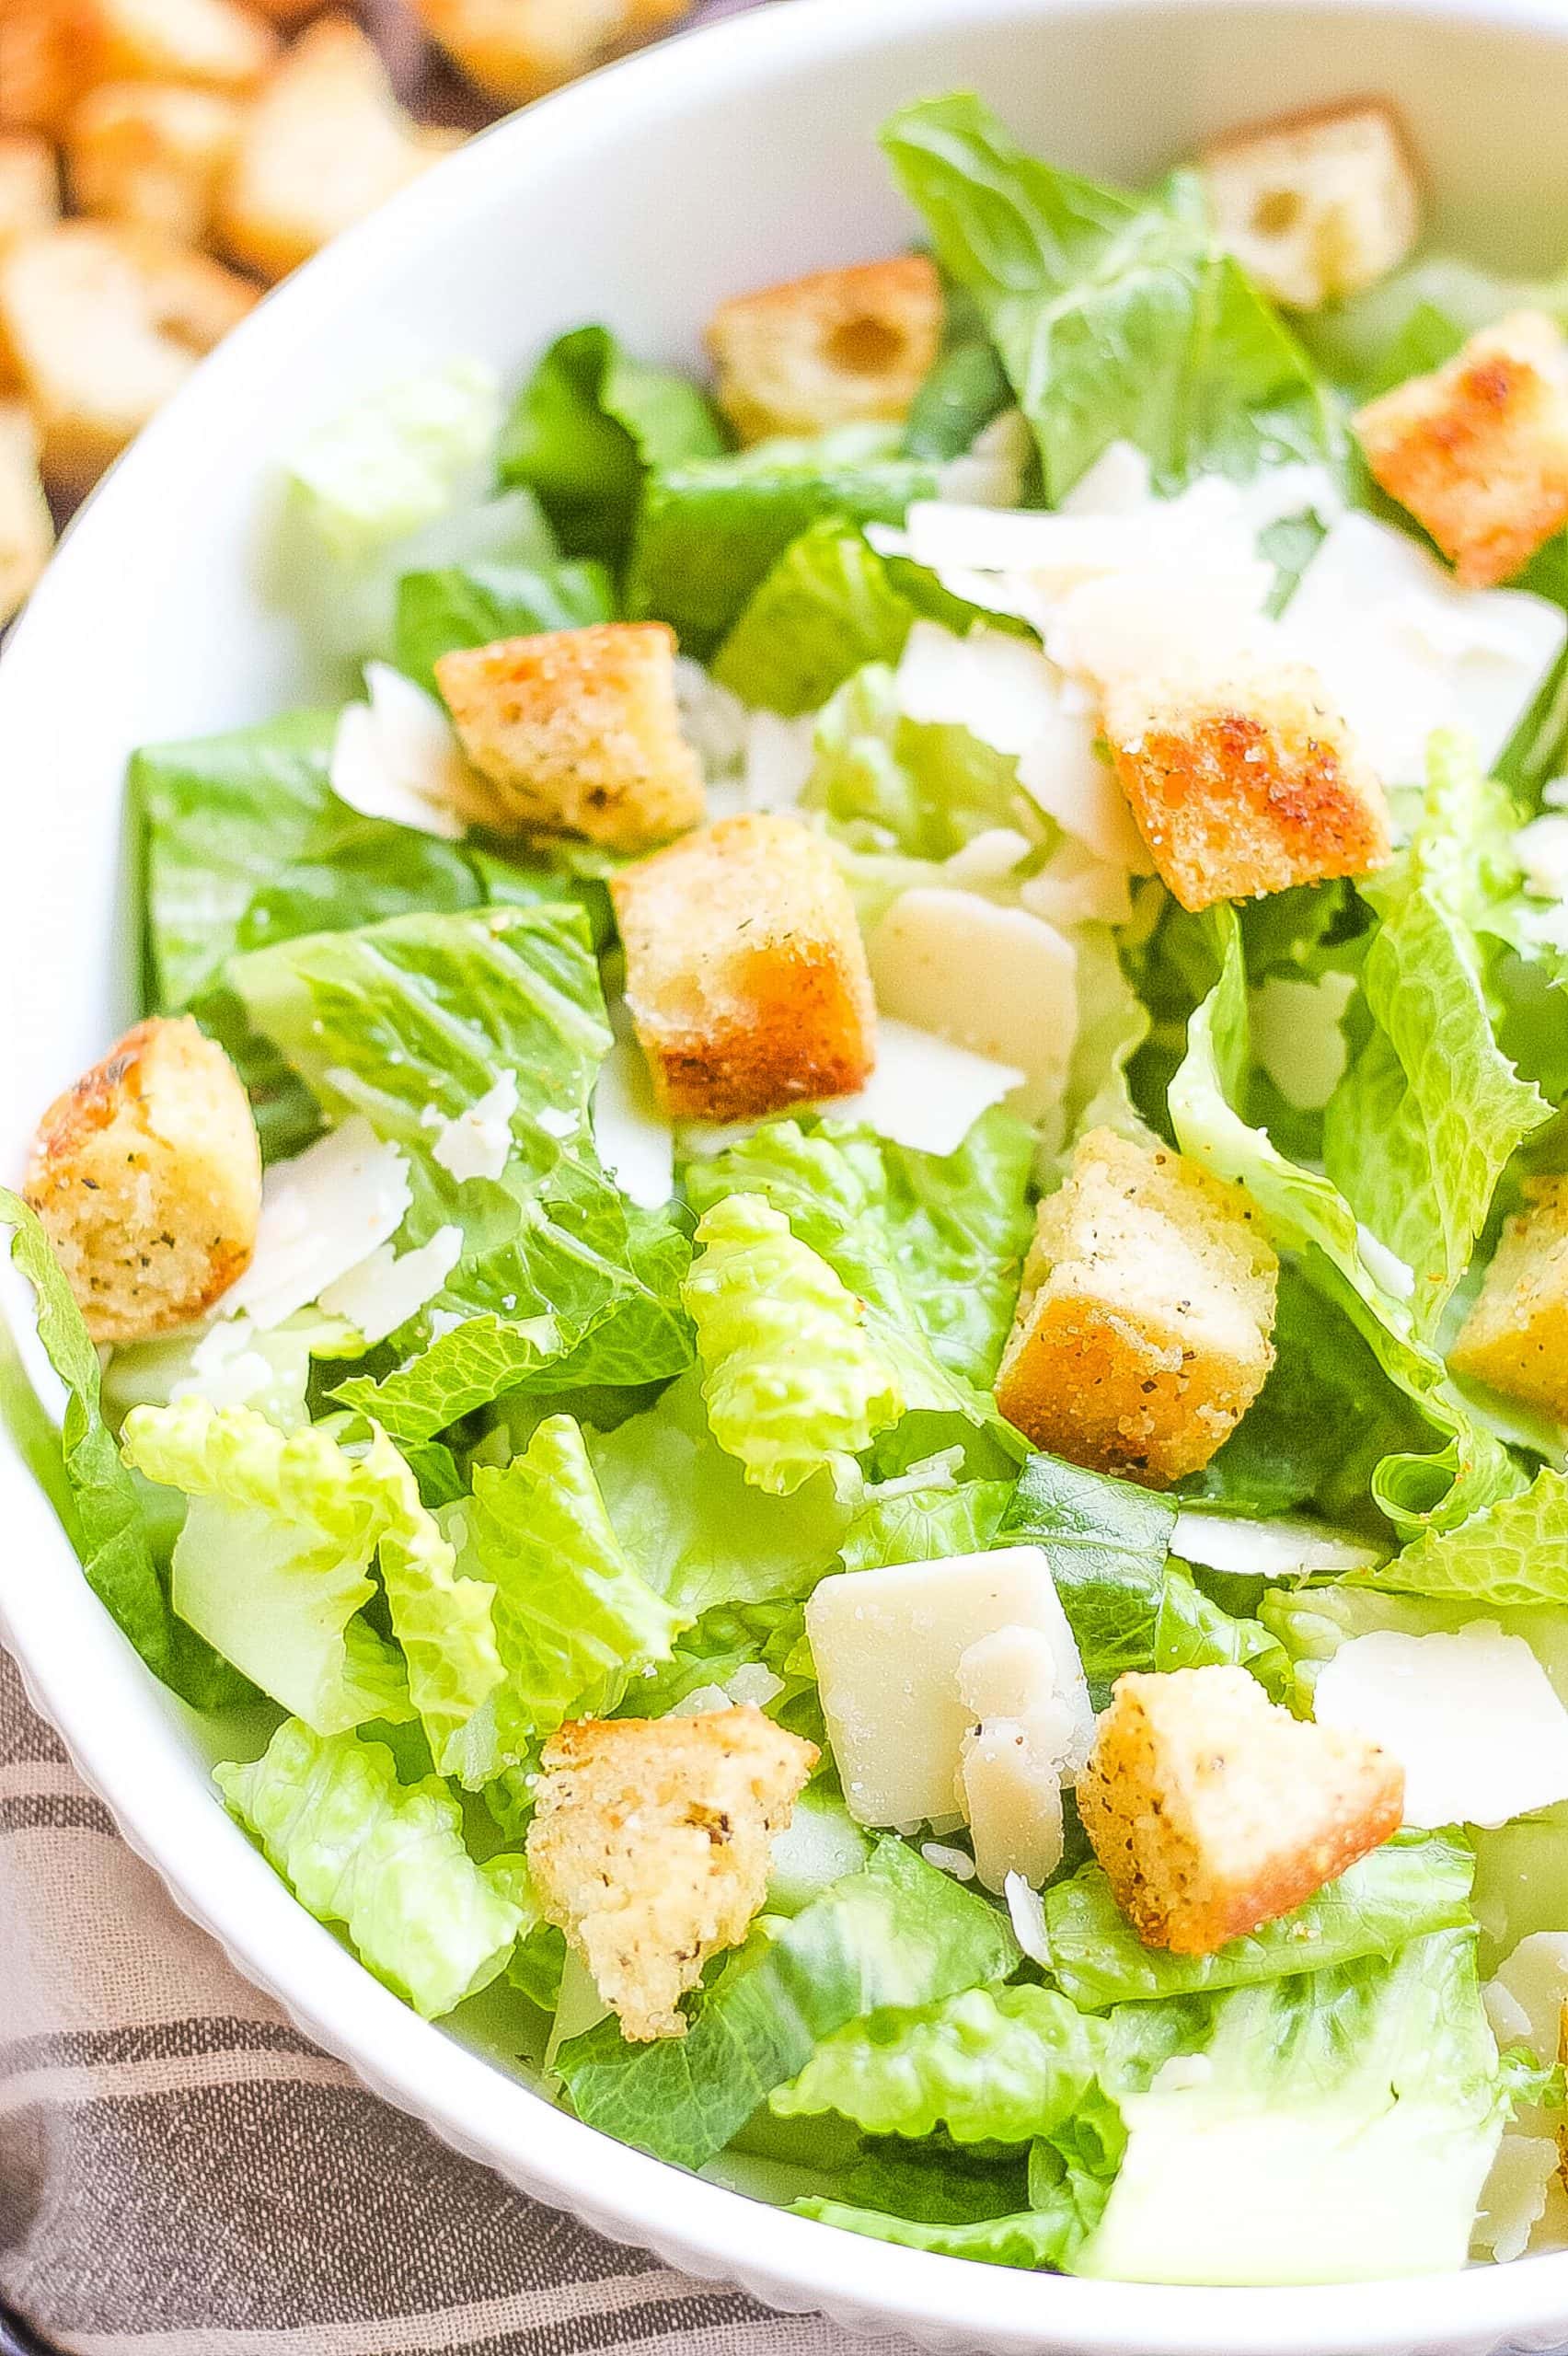 homemade crispy croutons with salad in bowl